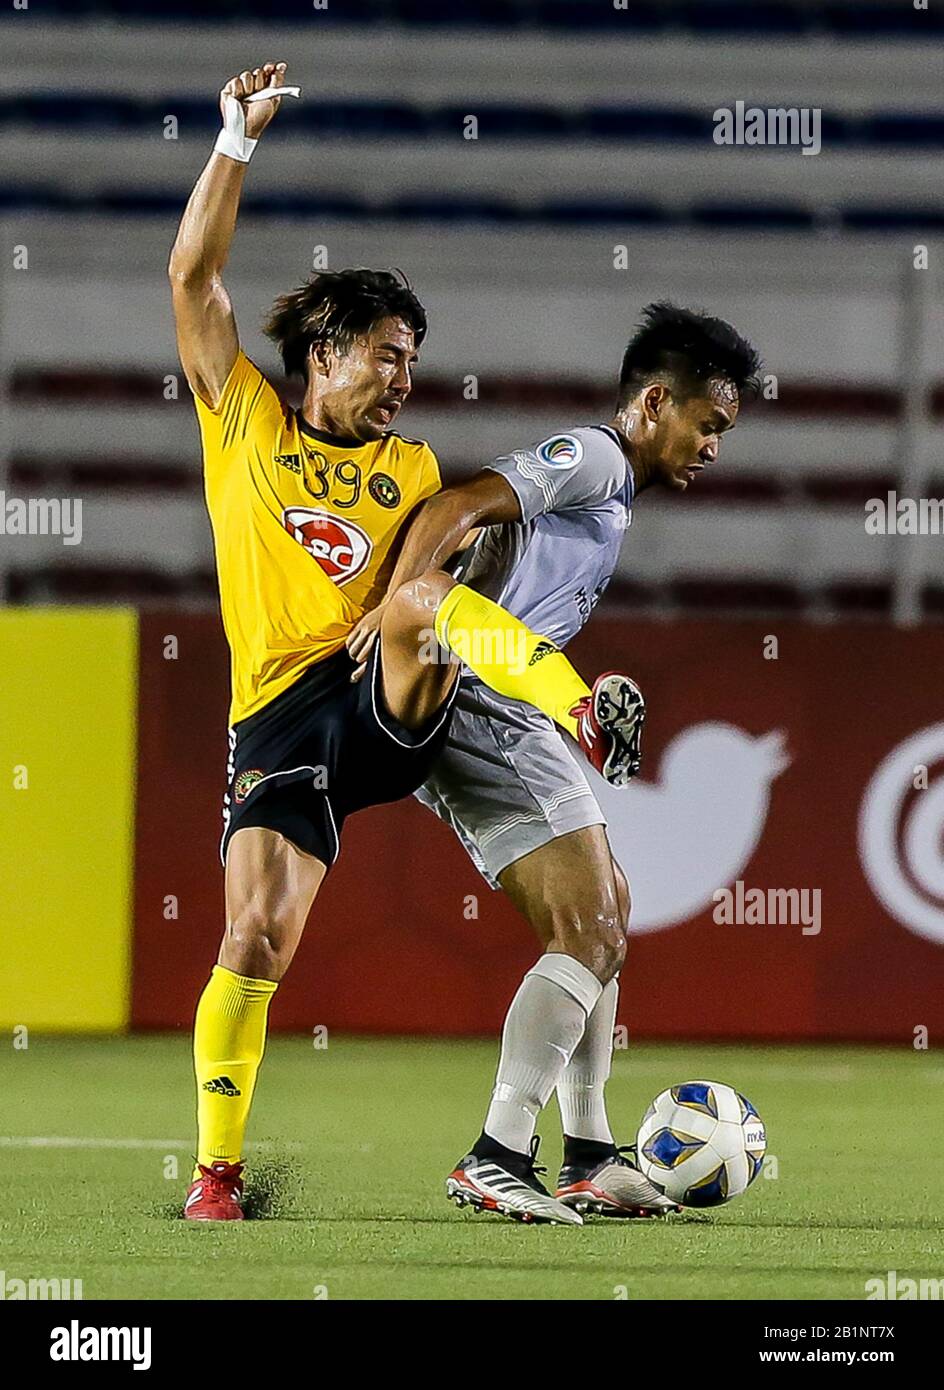 Manila. 26th Feb, 2020. Takumi Uesato (L) of the Philippines' Kaya FC-Iloilo competes with a player of Singapore's Tampines Rovers FC during their group H match at the AFC Cup 2020 in Manila, the Philippines on Feb. 26, 2020. Credit: Rouelle Umali/Xinhua/Alamy Live News Stock Photo